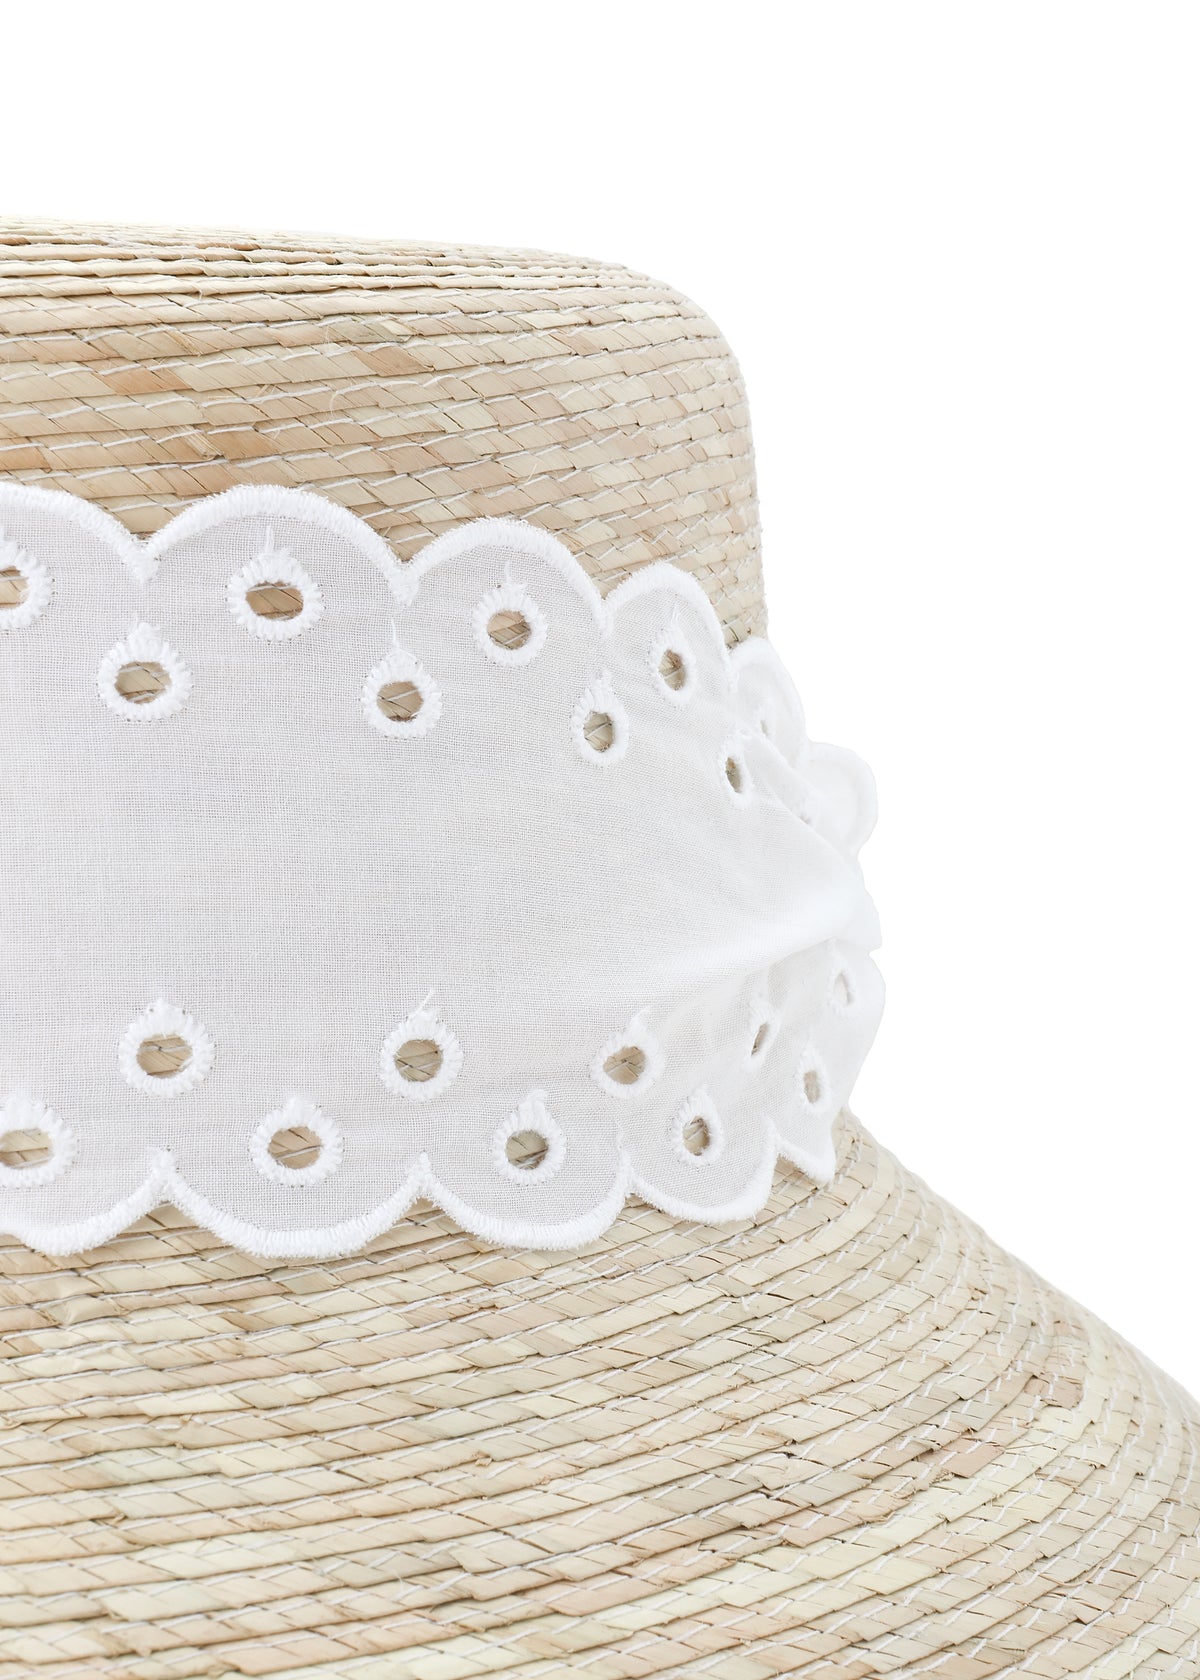 Clematis Bucket Hat With Antique Eyelet Scalloped Lace Ribbon